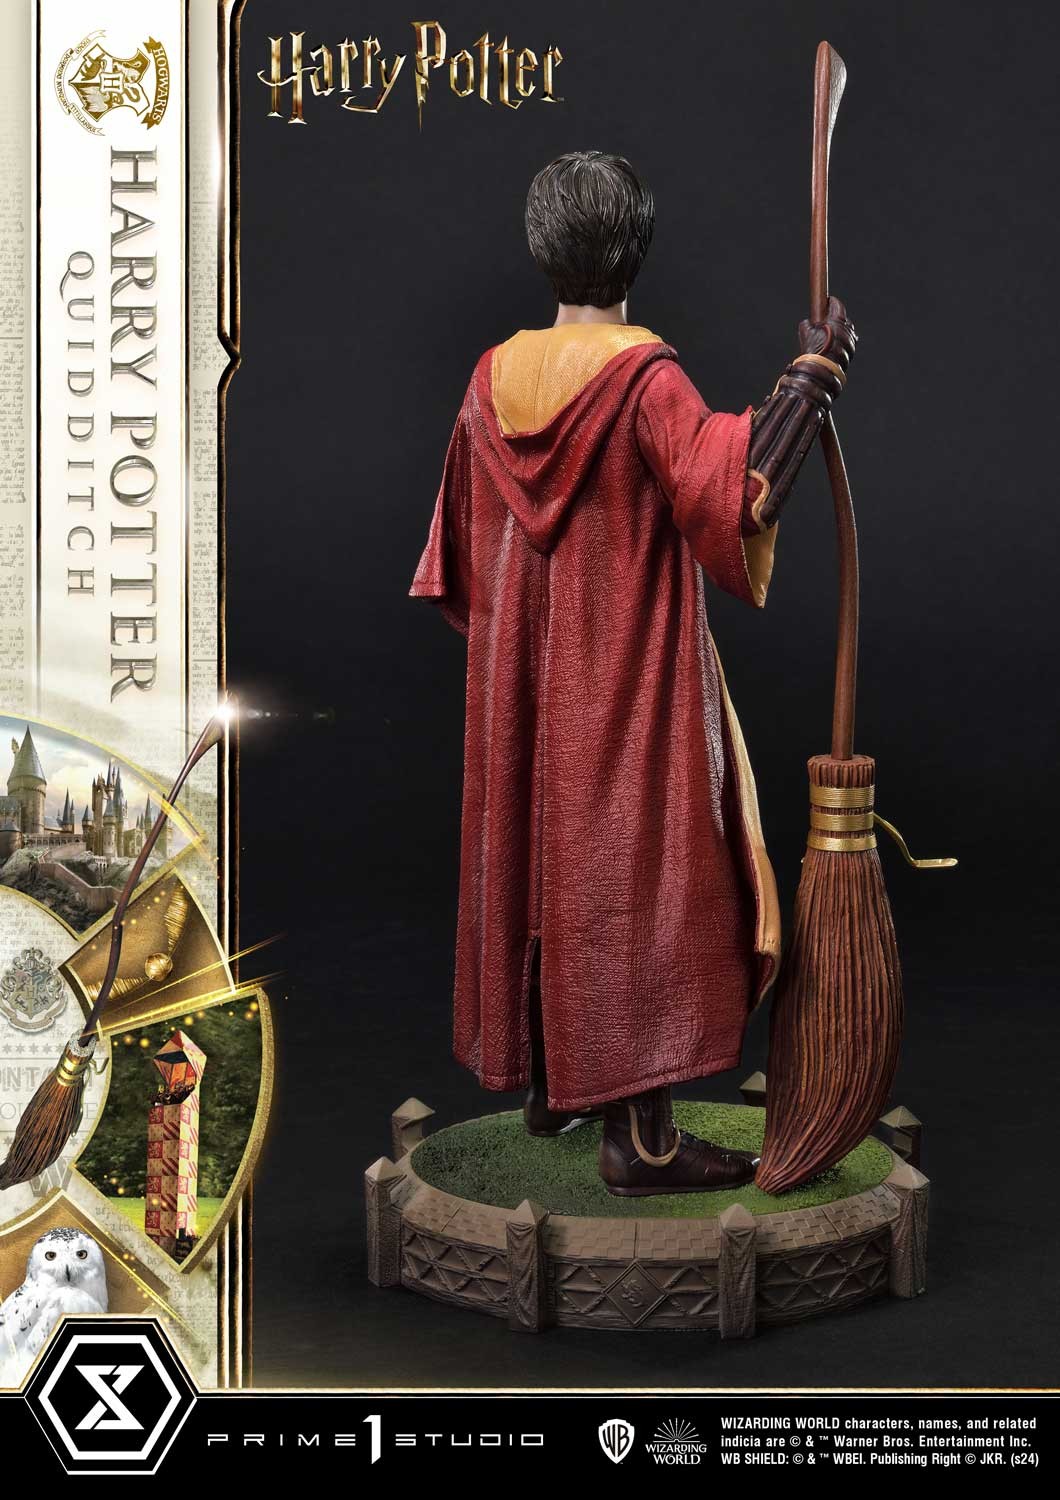 Harry Potter (Quidditch Edition) (Prototype Shown) View 12